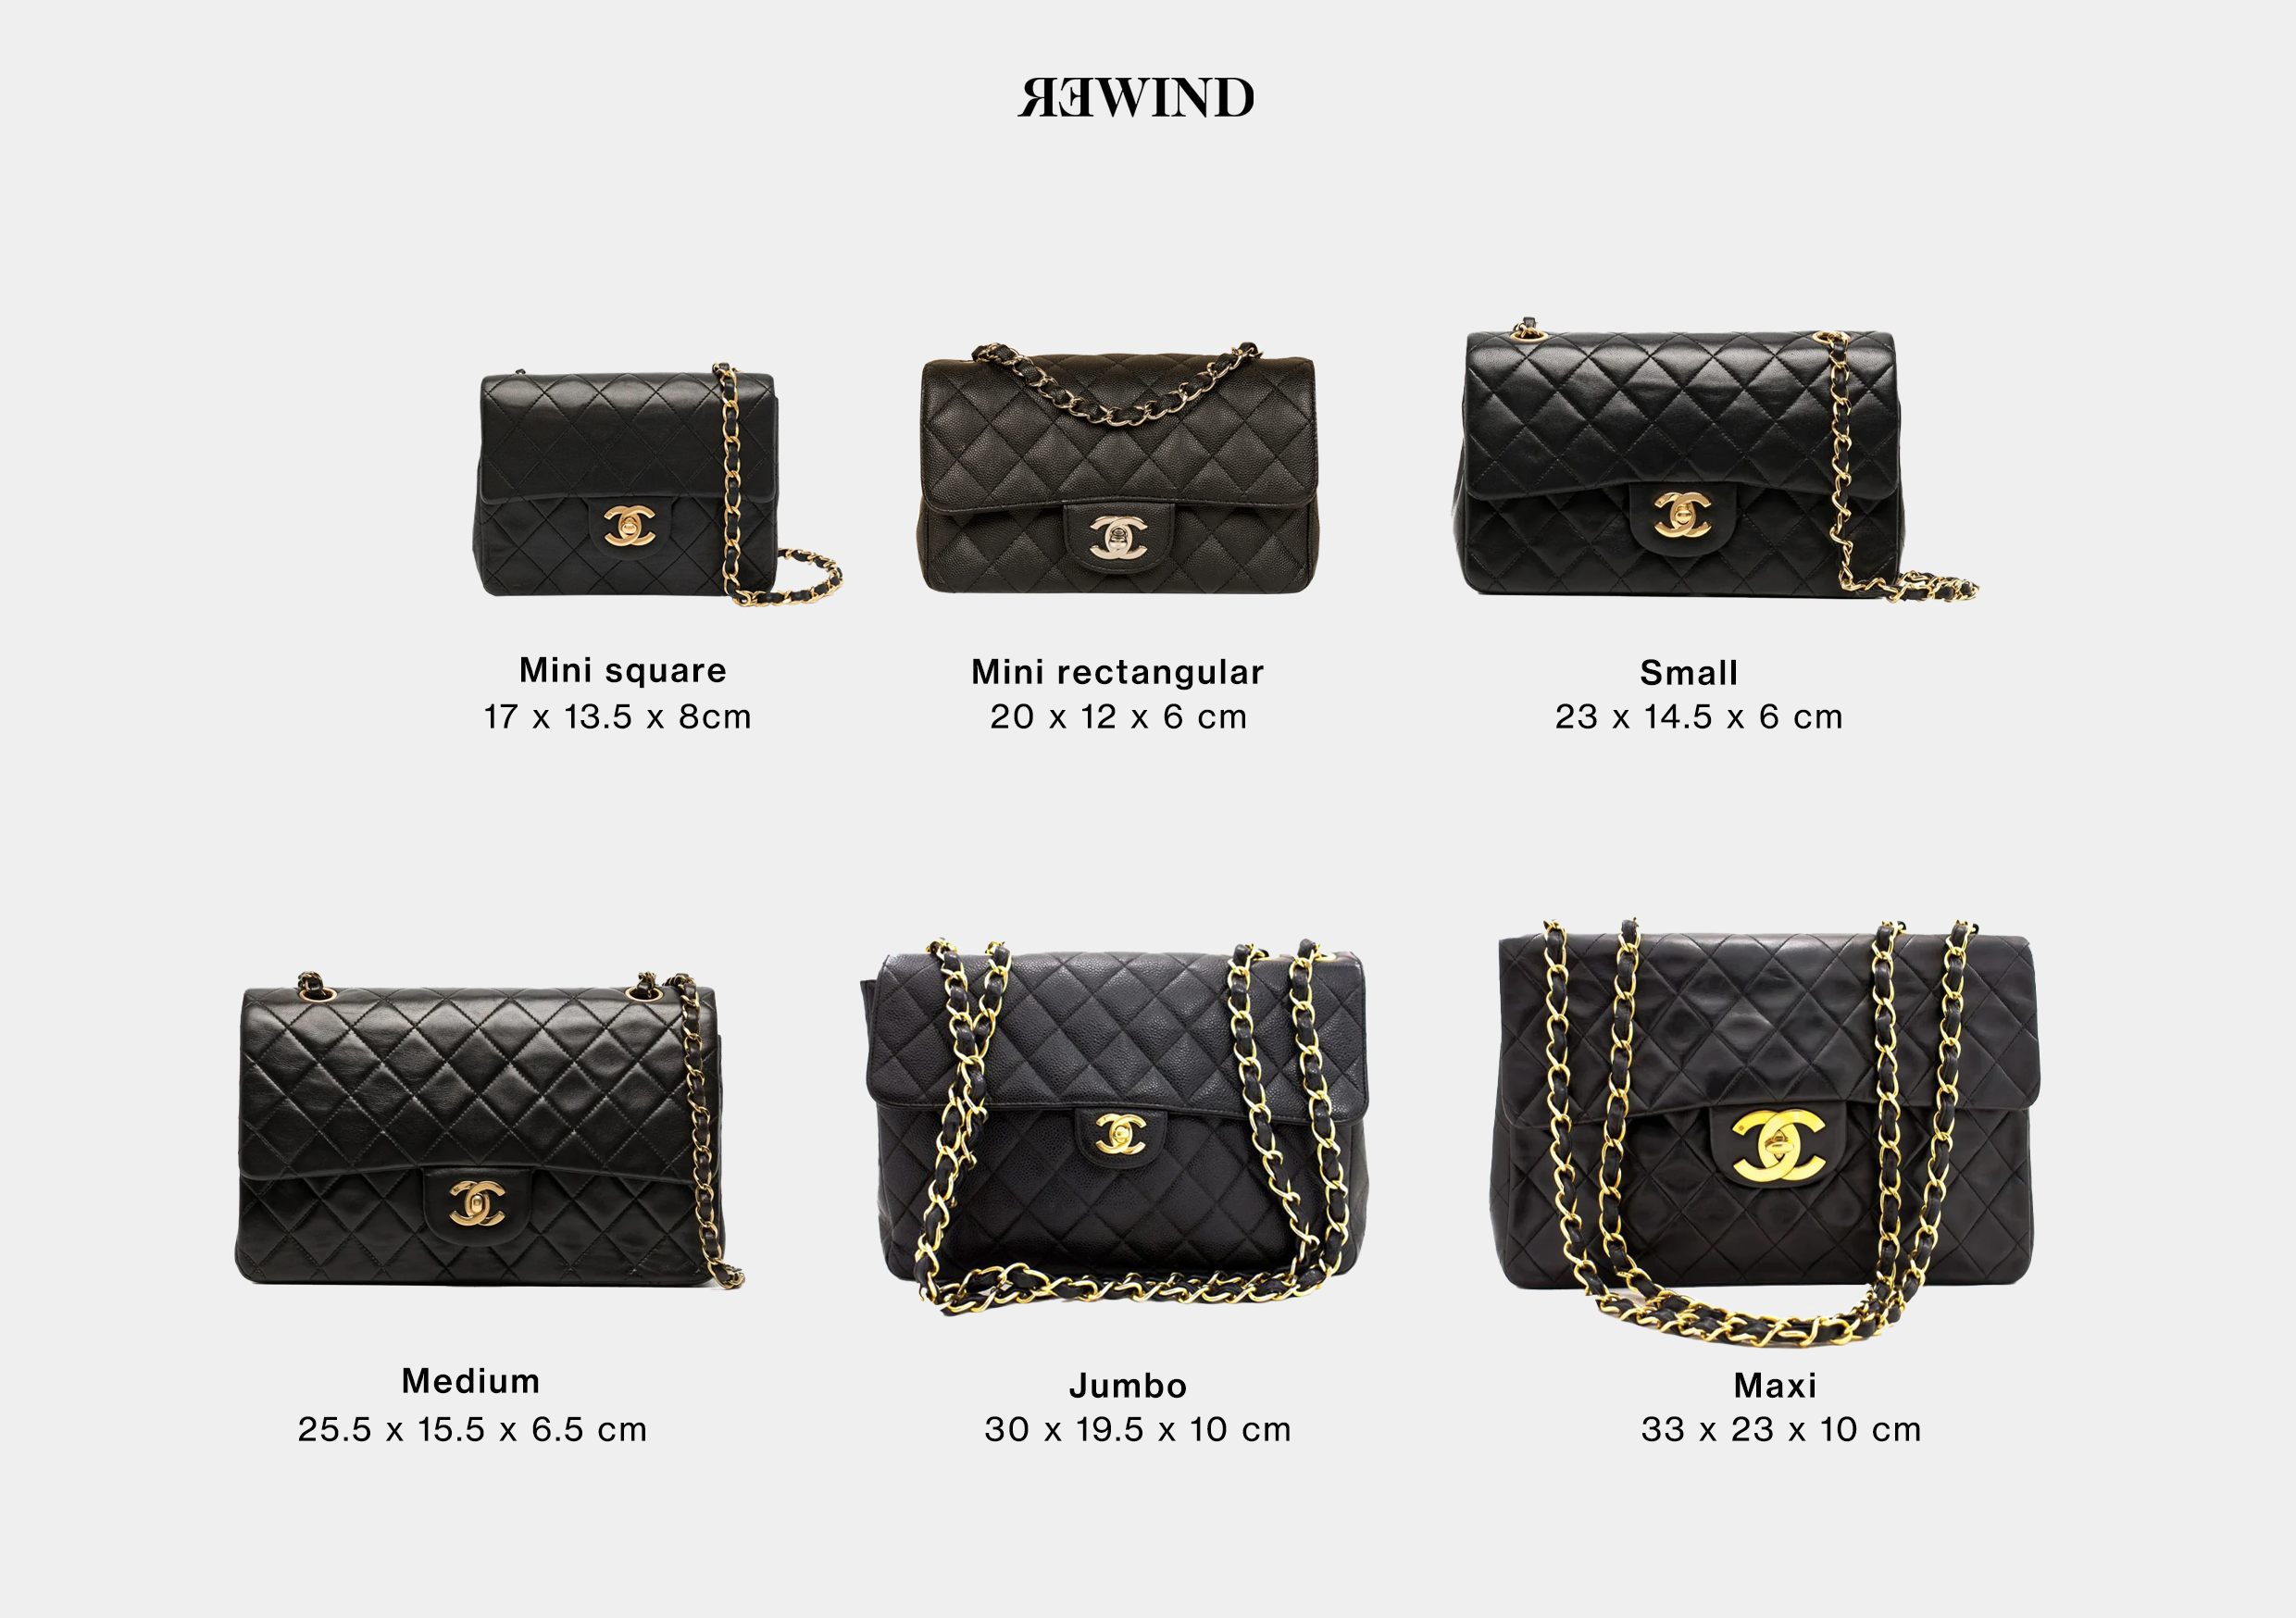 CHANEL FLAP BAG SIZE GUIDE